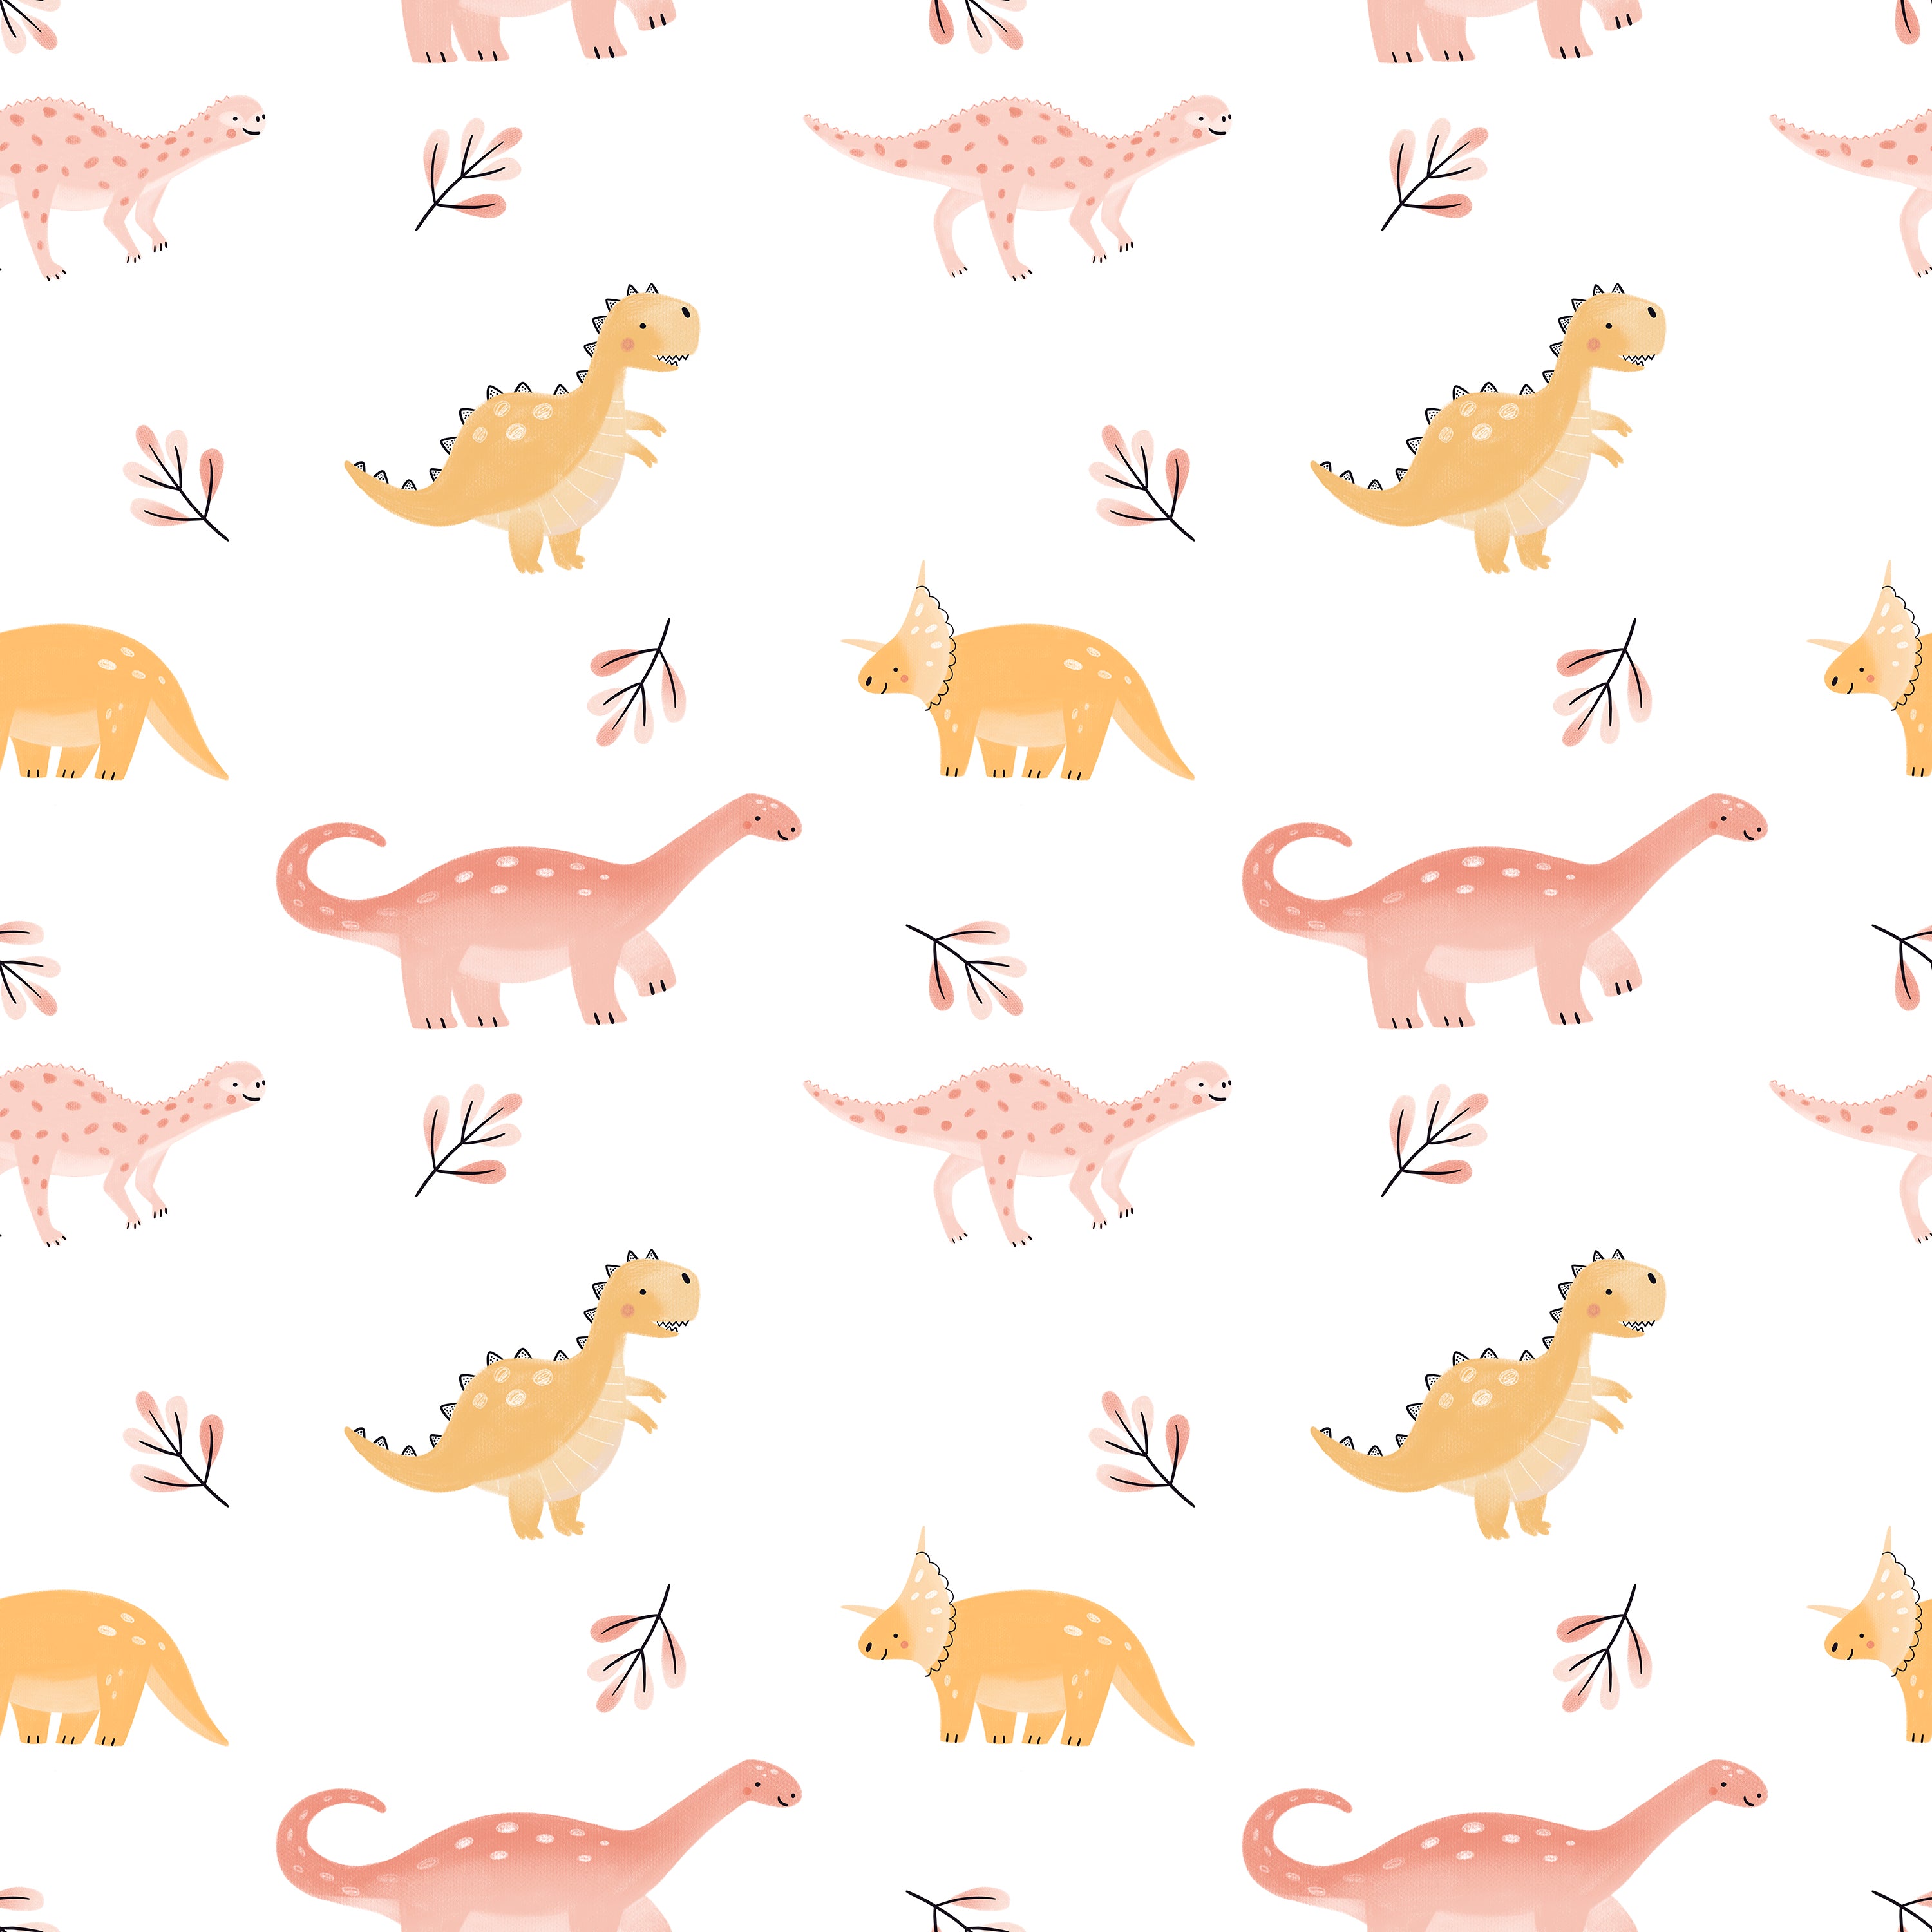 Seamless pattern wallpaper featuring cute cartoon-style dinosaurs in shades of pink and yellow, interspersed with small, simple plant illustrations on a white background. Dinosaurs include various species such as stegosaurus and diplodocus, depicted in a playful, child-friendly design